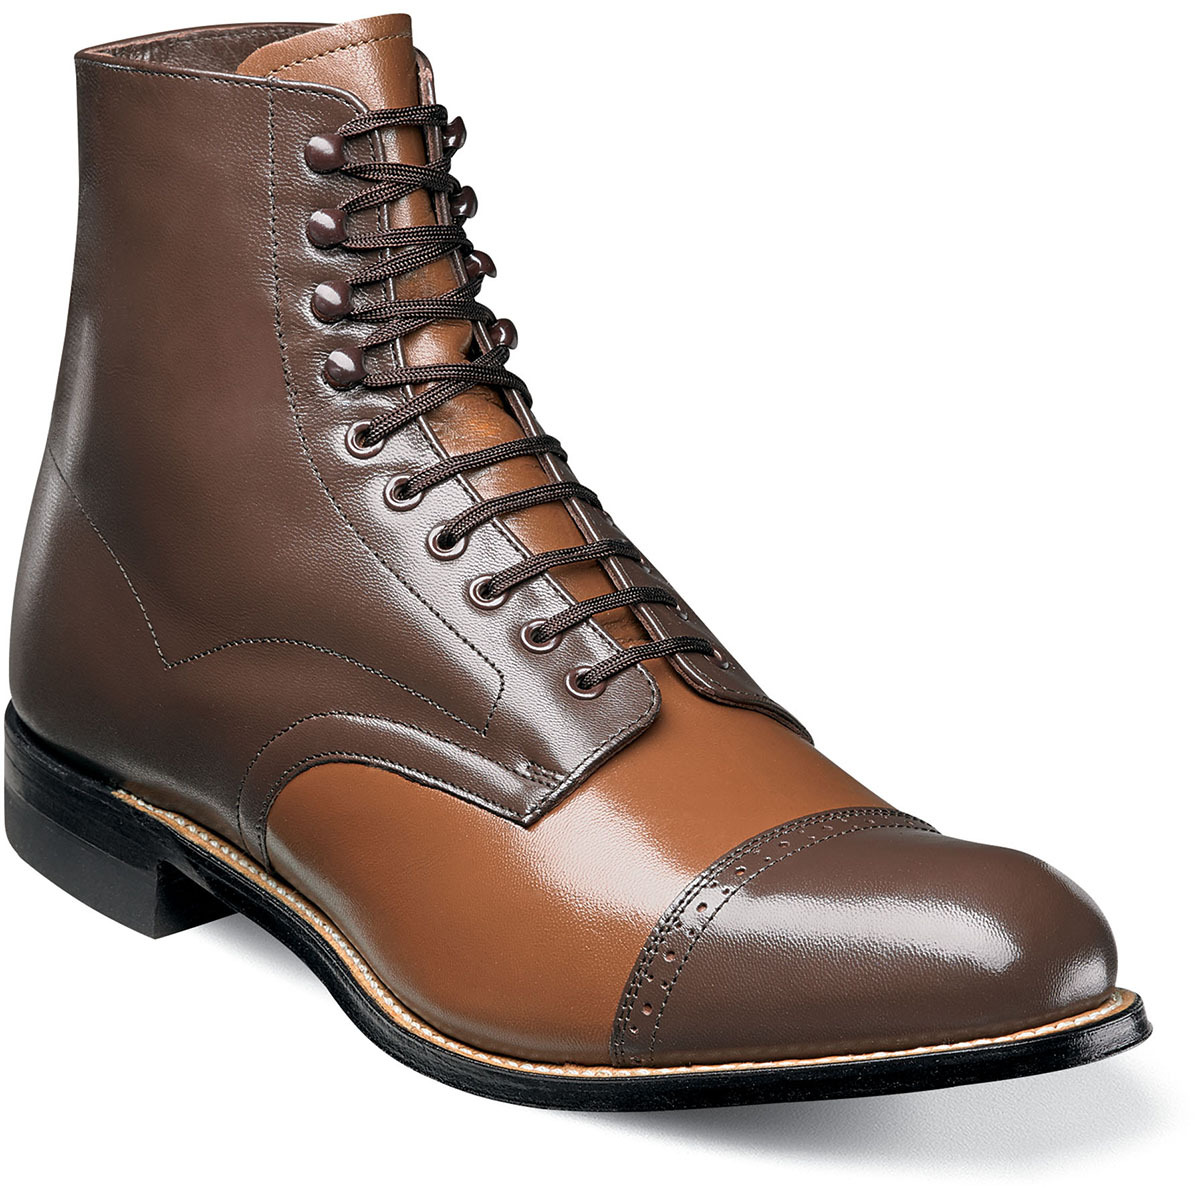 High Ankle Brown Tan Rounded Cap Toe Handmade Genuine Leather Stylish Boots